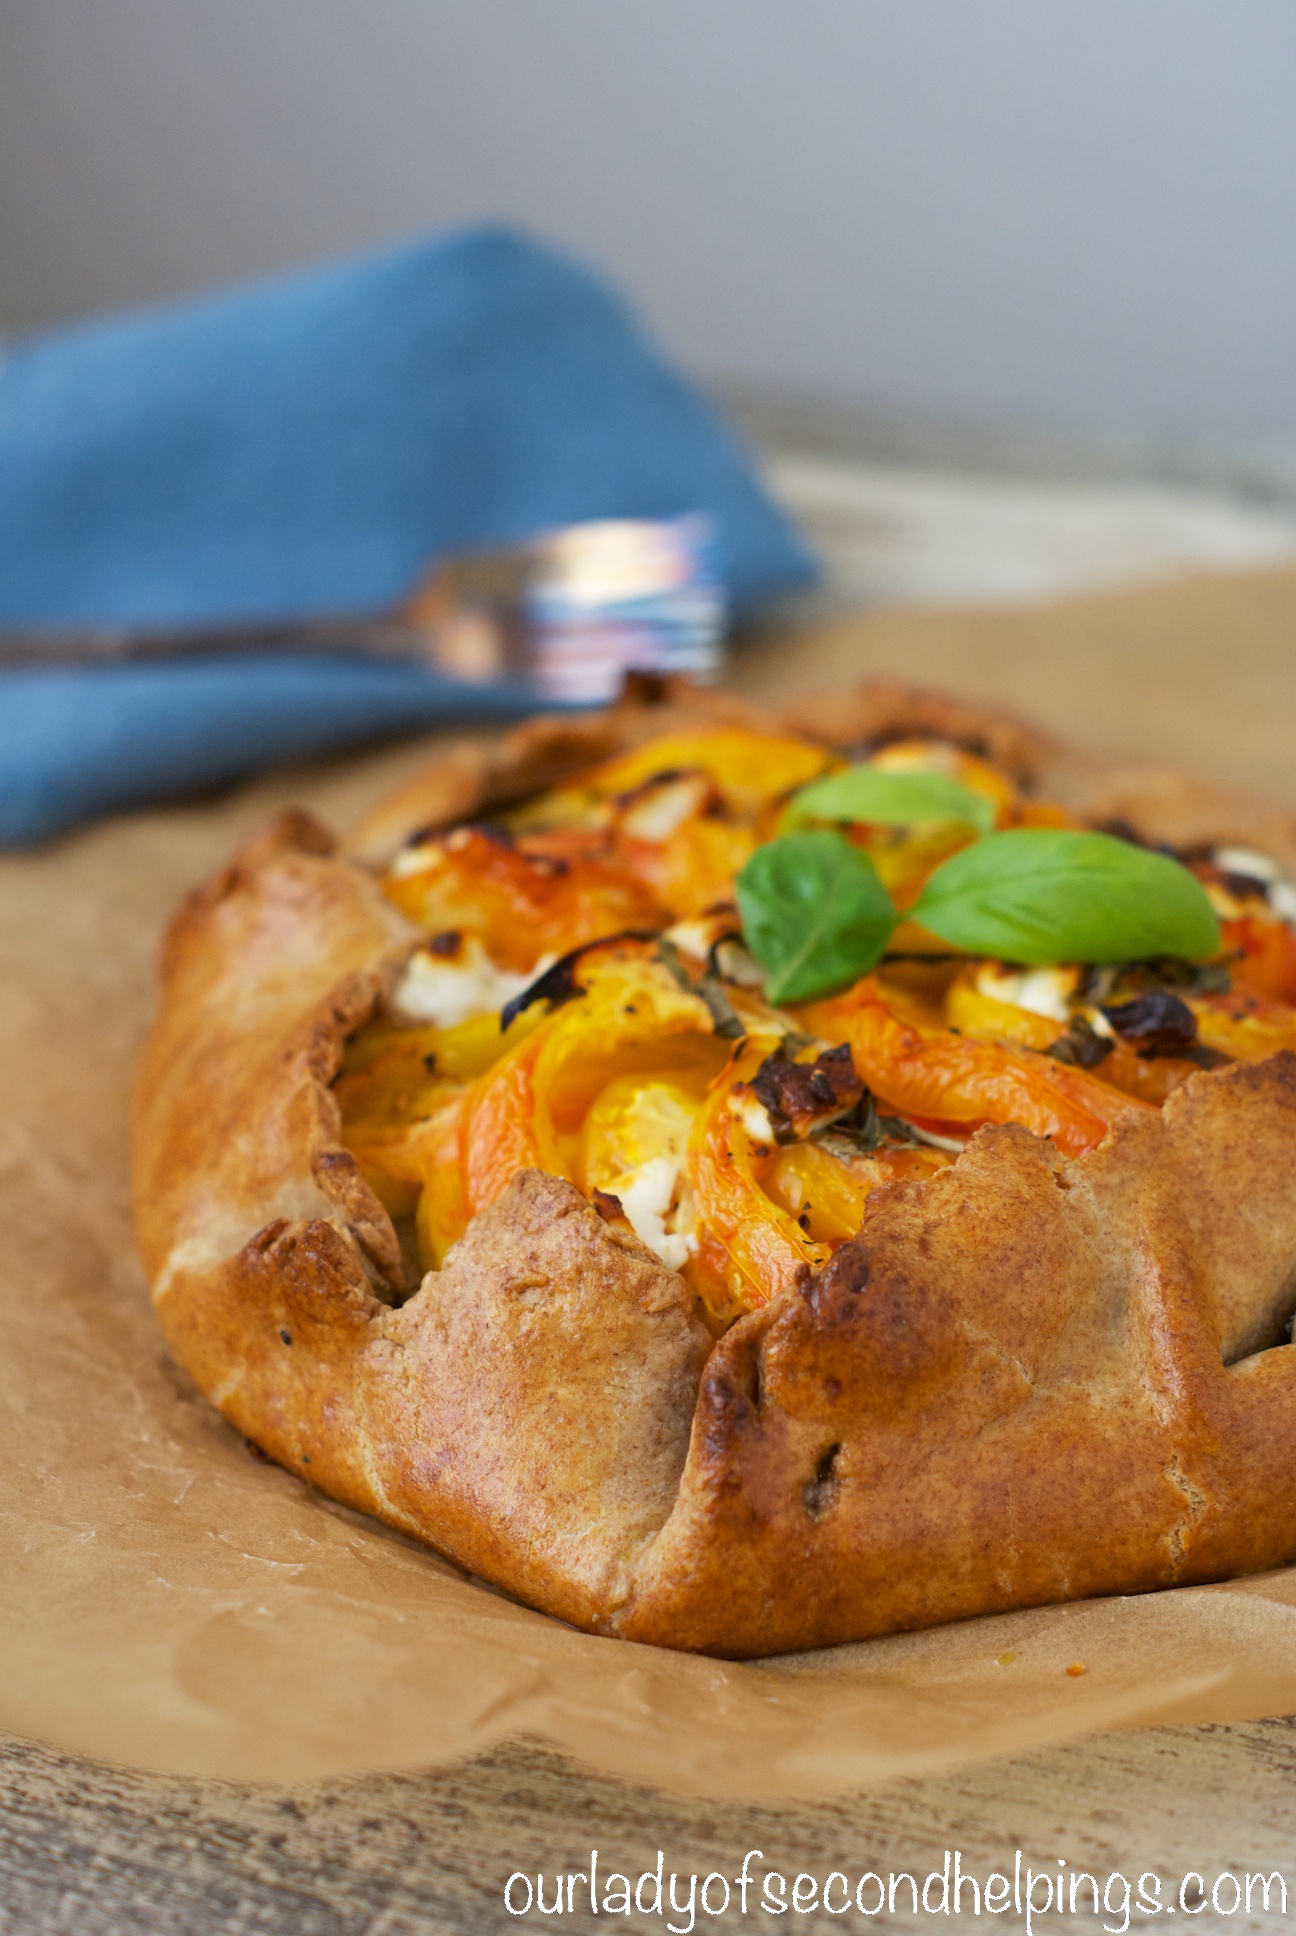 Tomato & Sweet Onion Galette | Our Lady of Second Helpings